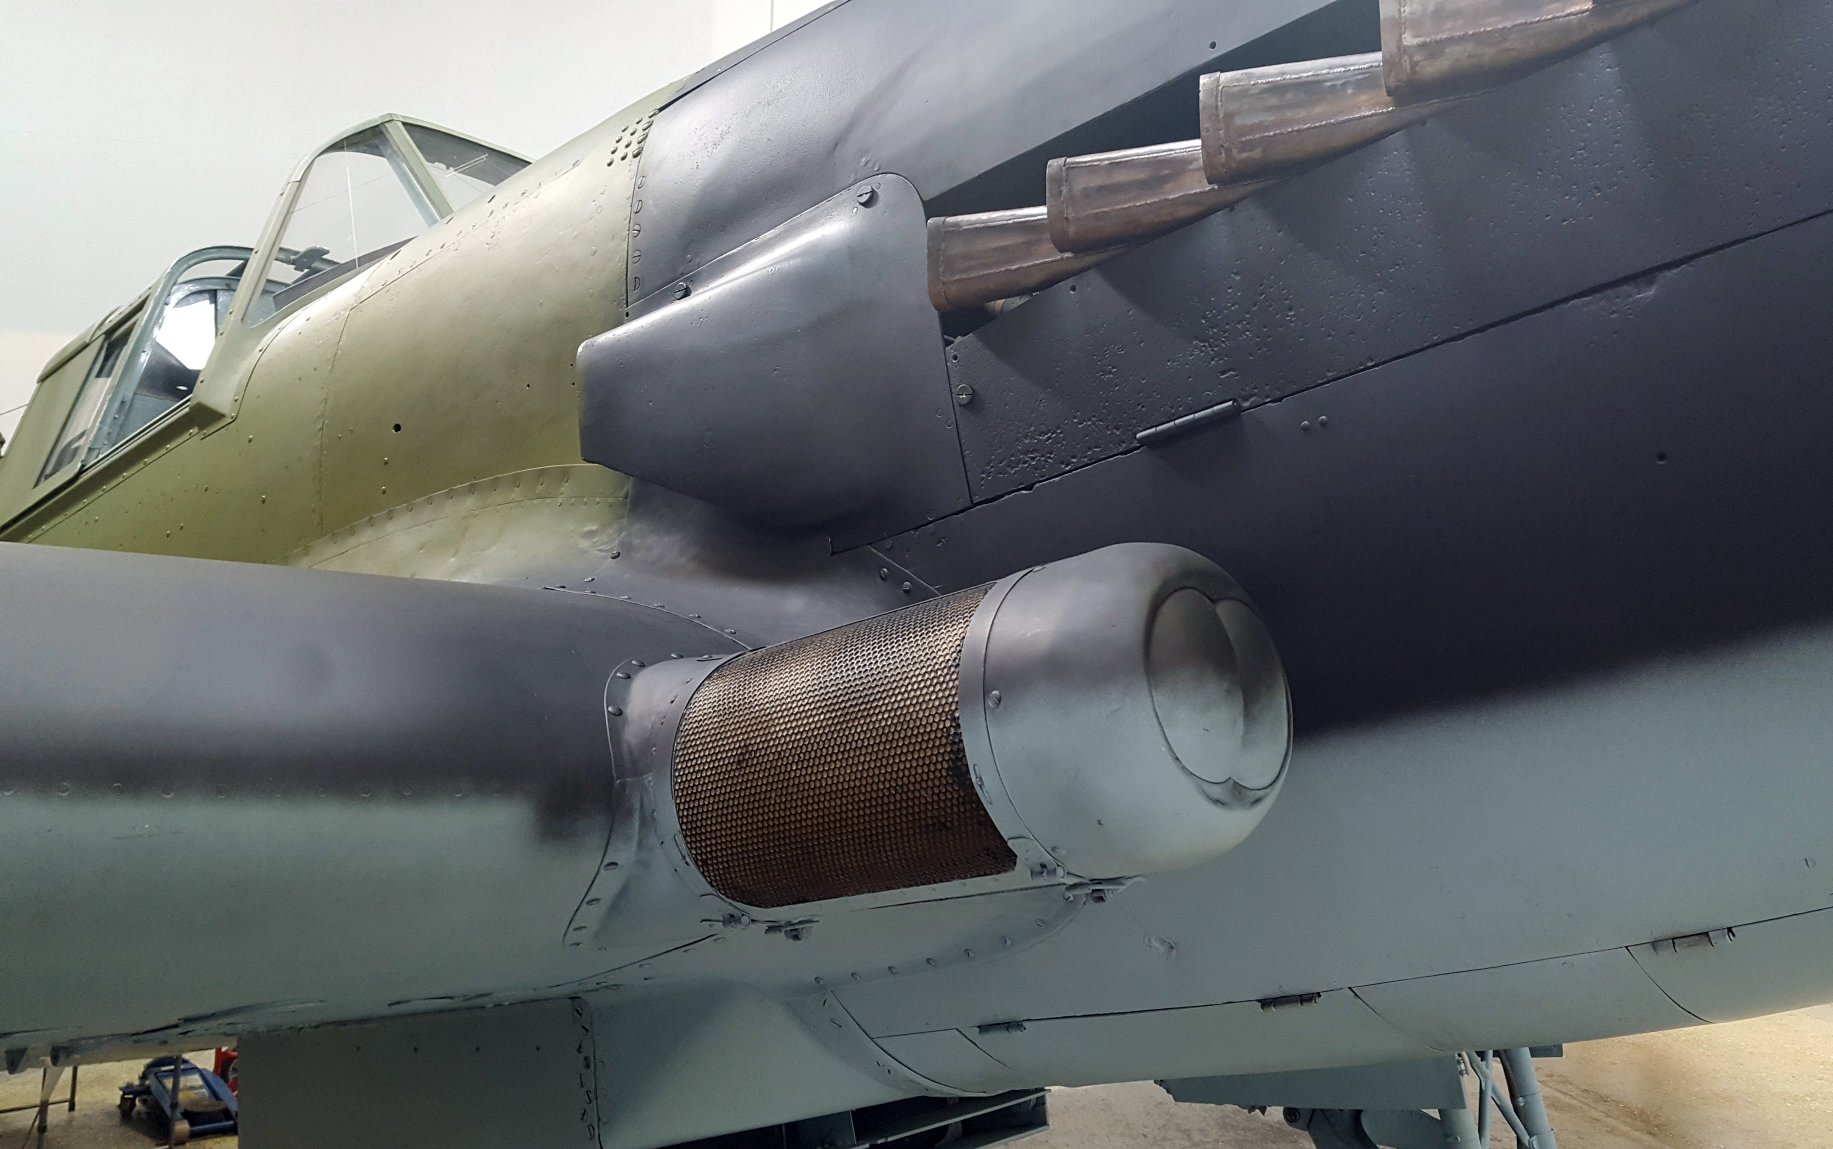 The Il-2 "stump" is actually a carburetor intake.